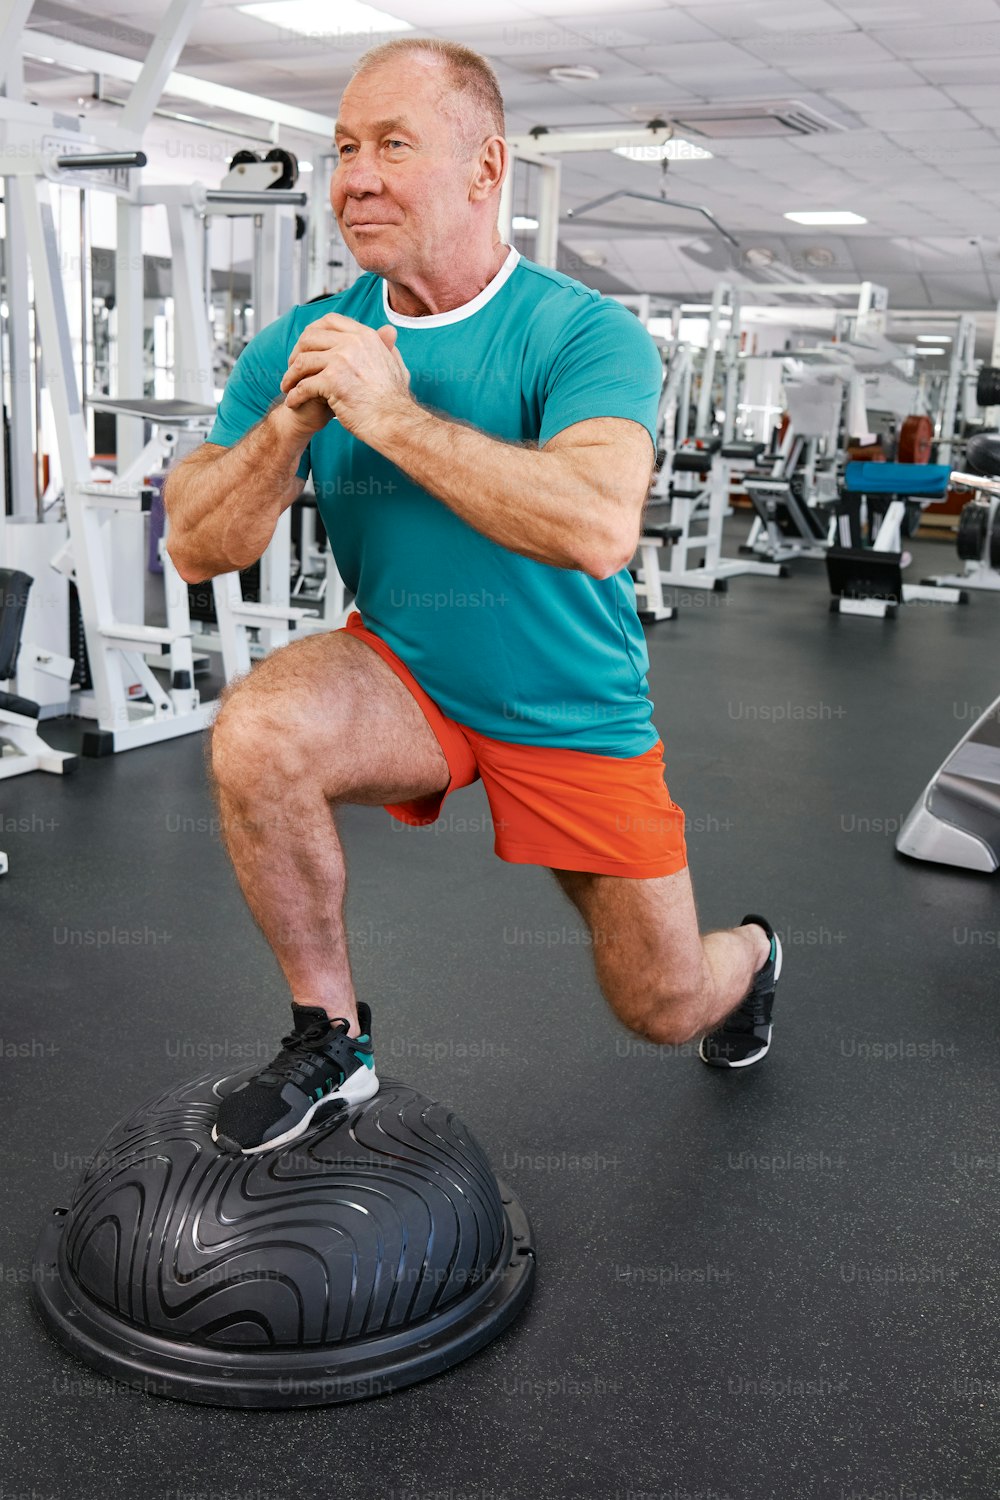 a man is squatting on a tire in a gym